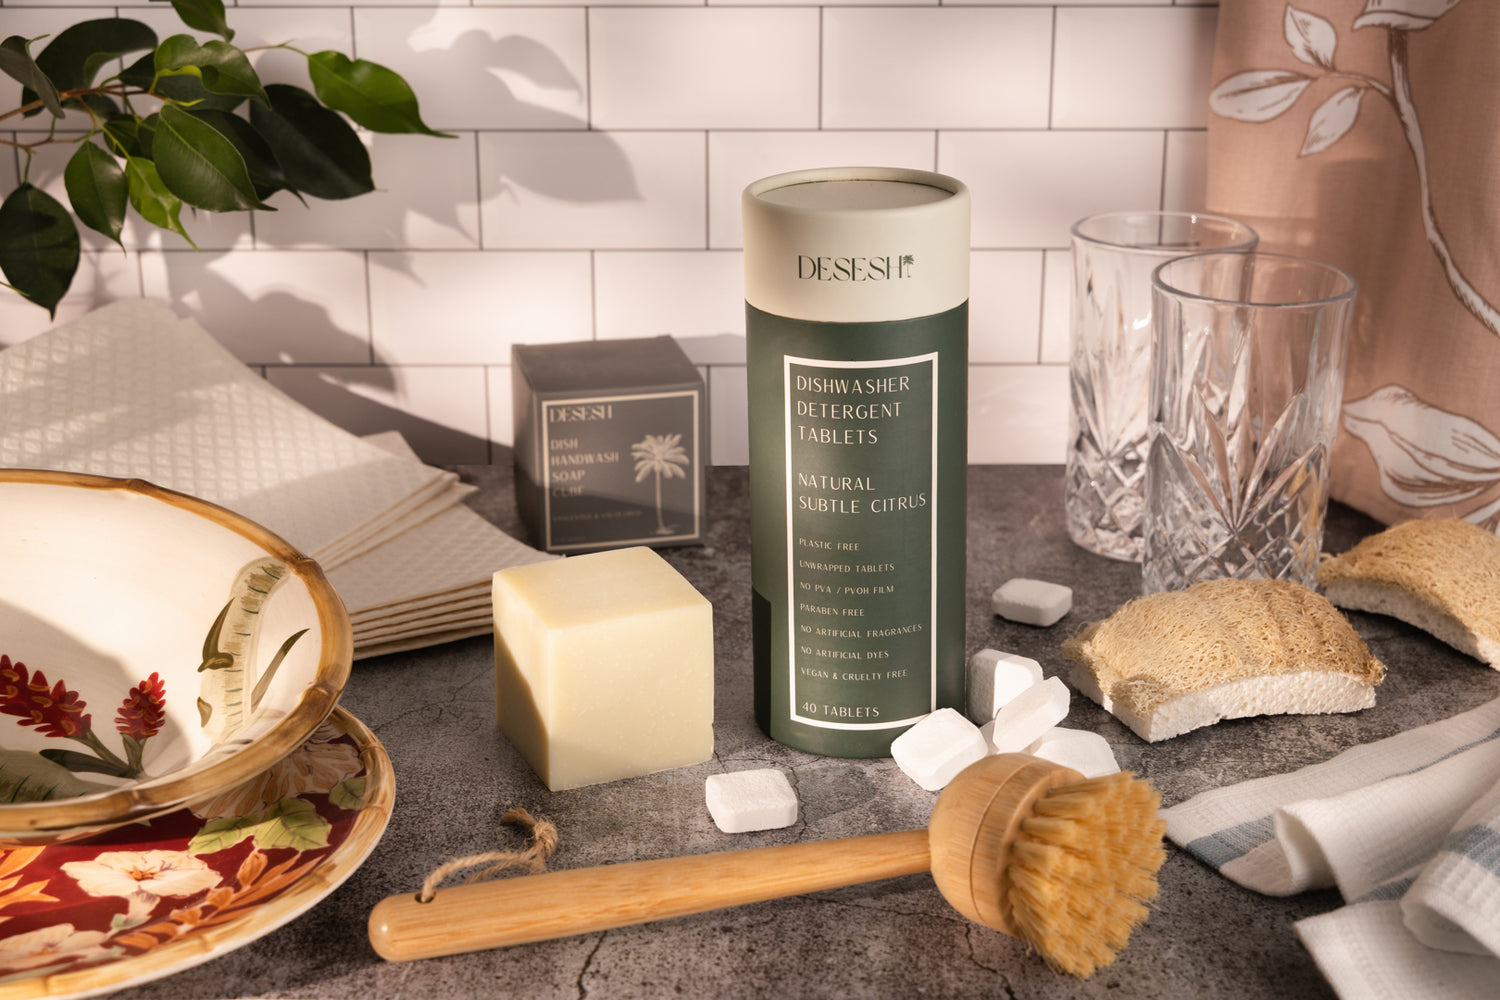 This image shows the Desesh range of plastic free dishwashing products including PVA-free unwrapped dishwasher tablets, dish soap bar, bamboo brush, plant cellulose sponge, and Swedish dish cloths. These are a part of Desesh's range of zero waste, plastic free, eco friendly, more sustainable personal care and everyday essential products.